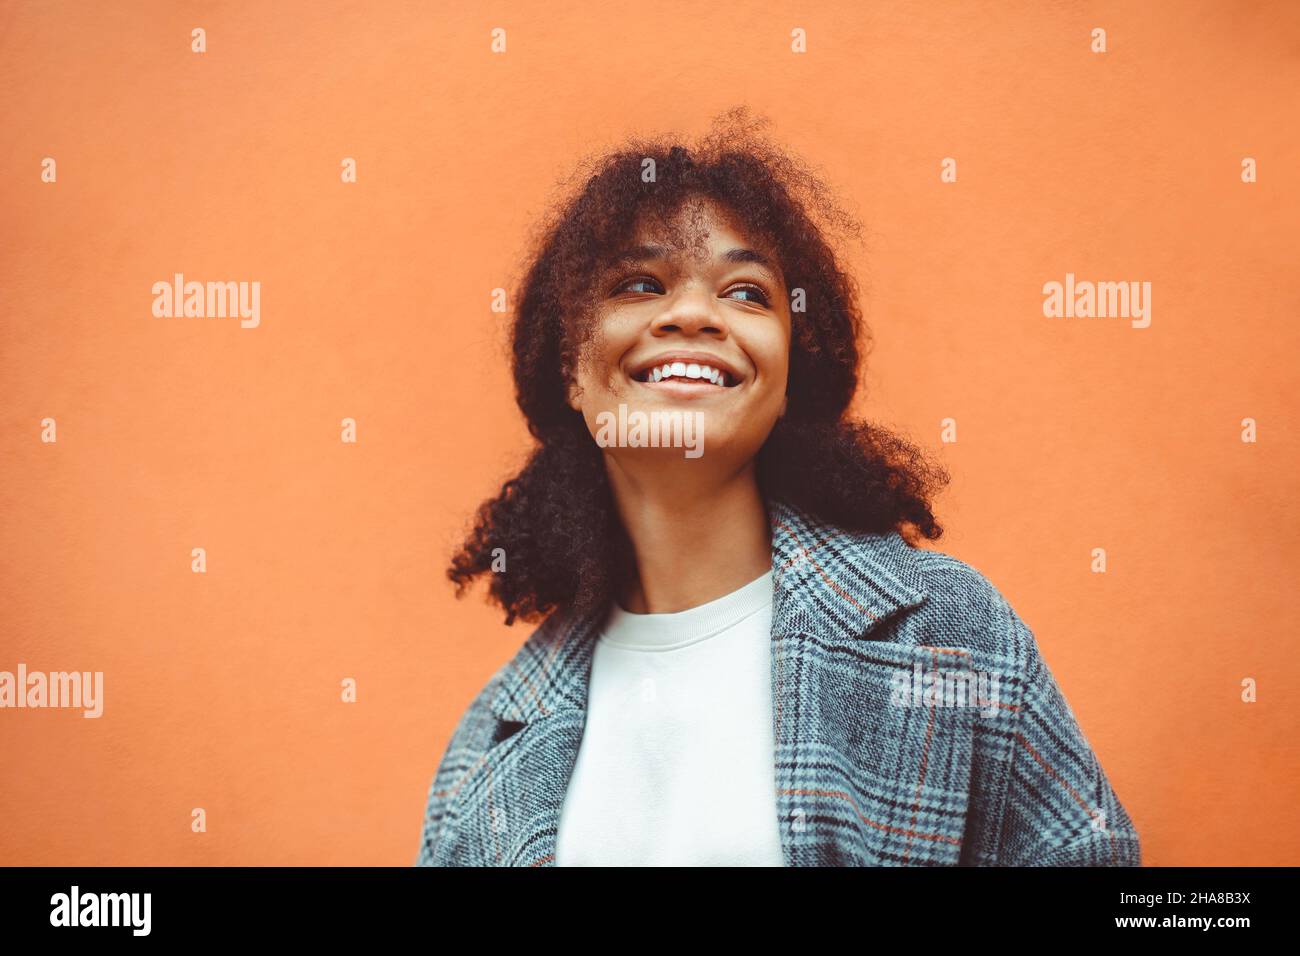 Enjoying Life. Beautiful happy African ethnicity girl with lush dark curly hairstyle in stylish coat standing against orange wall background, looking Stock Photo